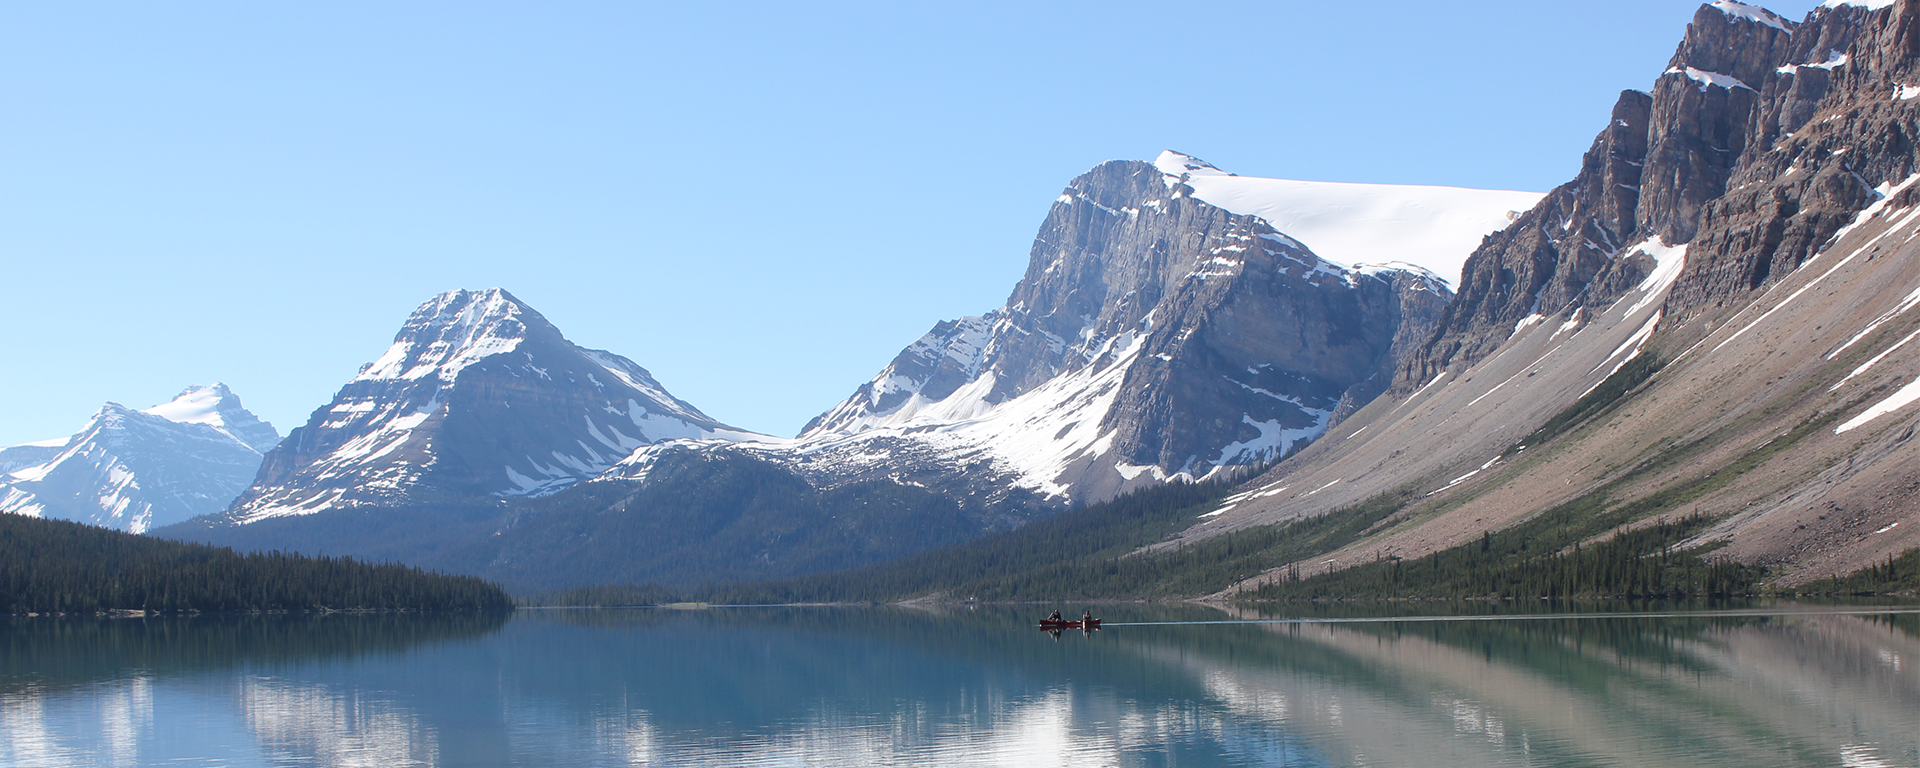 Morning canoe on Bow Lake in Banff National Park, located on the Icefields Parkway